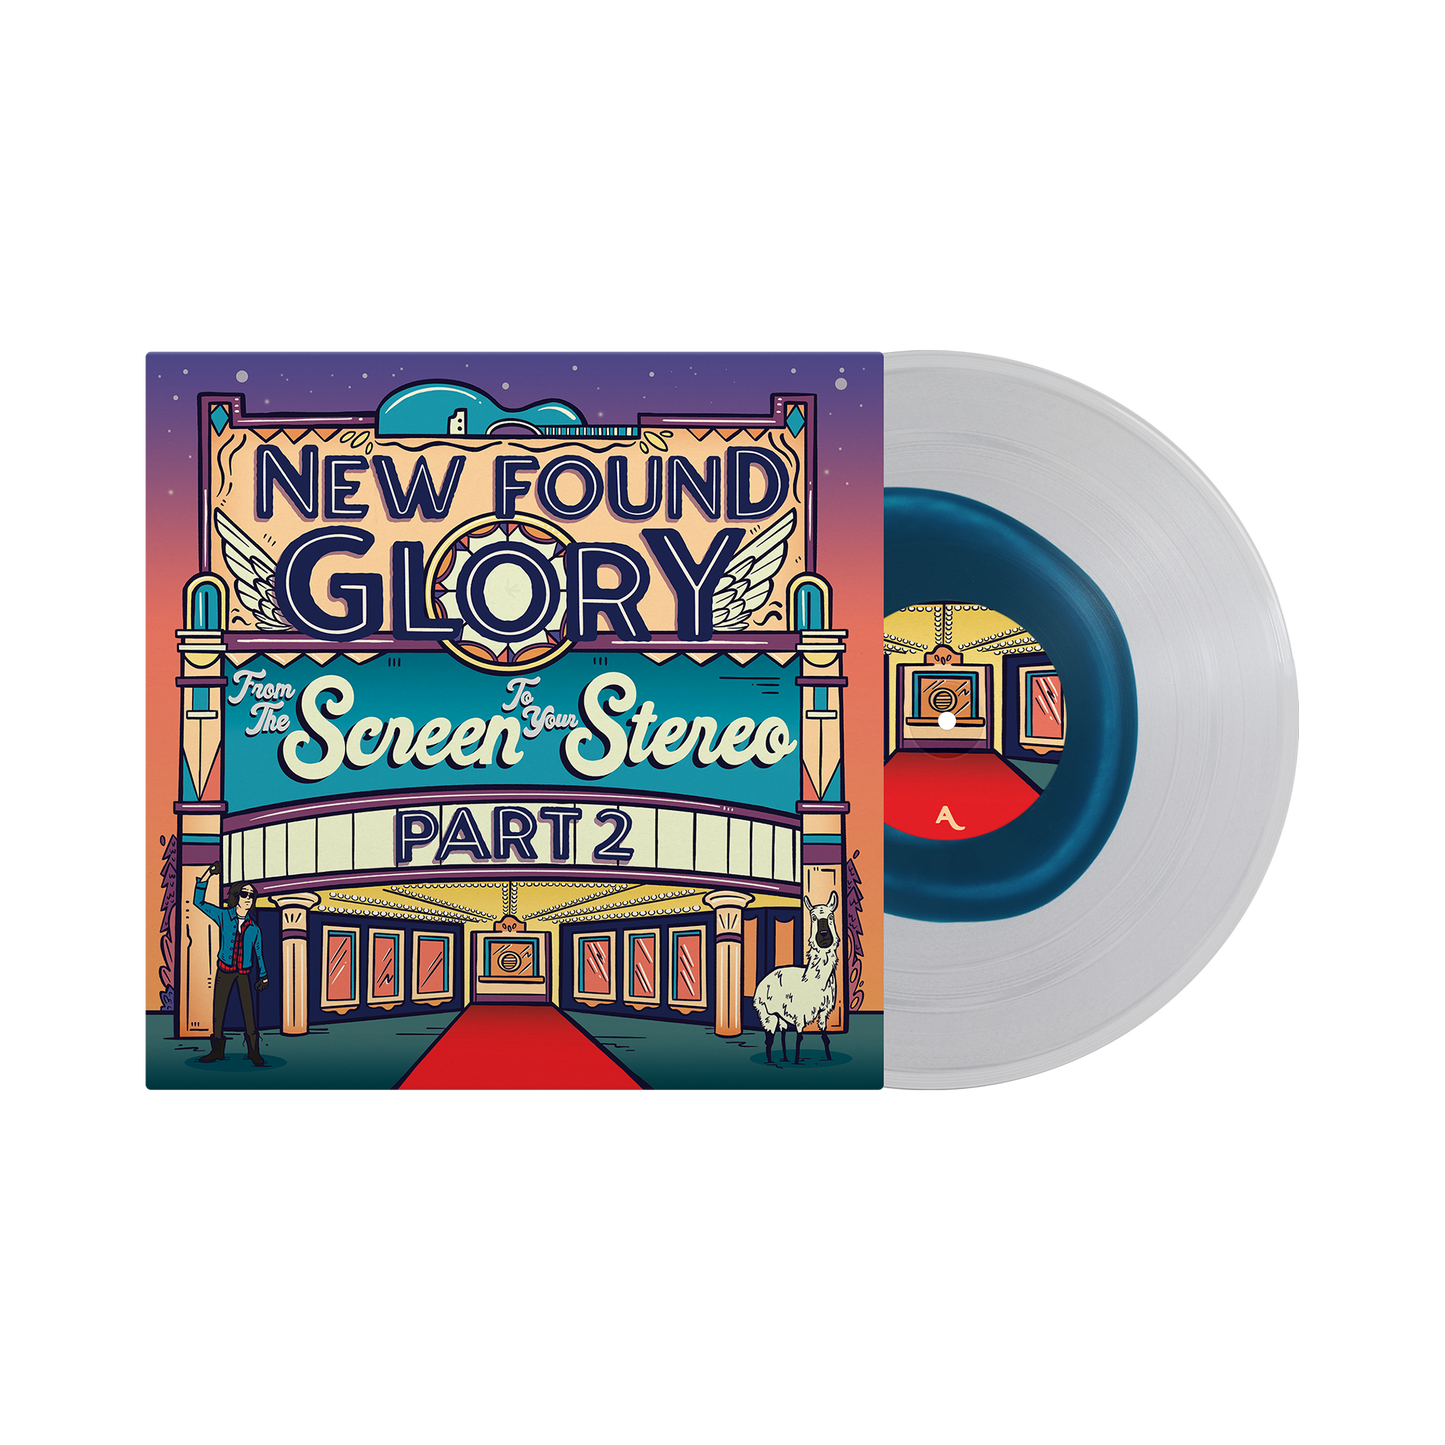 New Found Glory - From The Screen To Your Stereo Part 2 - Color In Color Vinyl